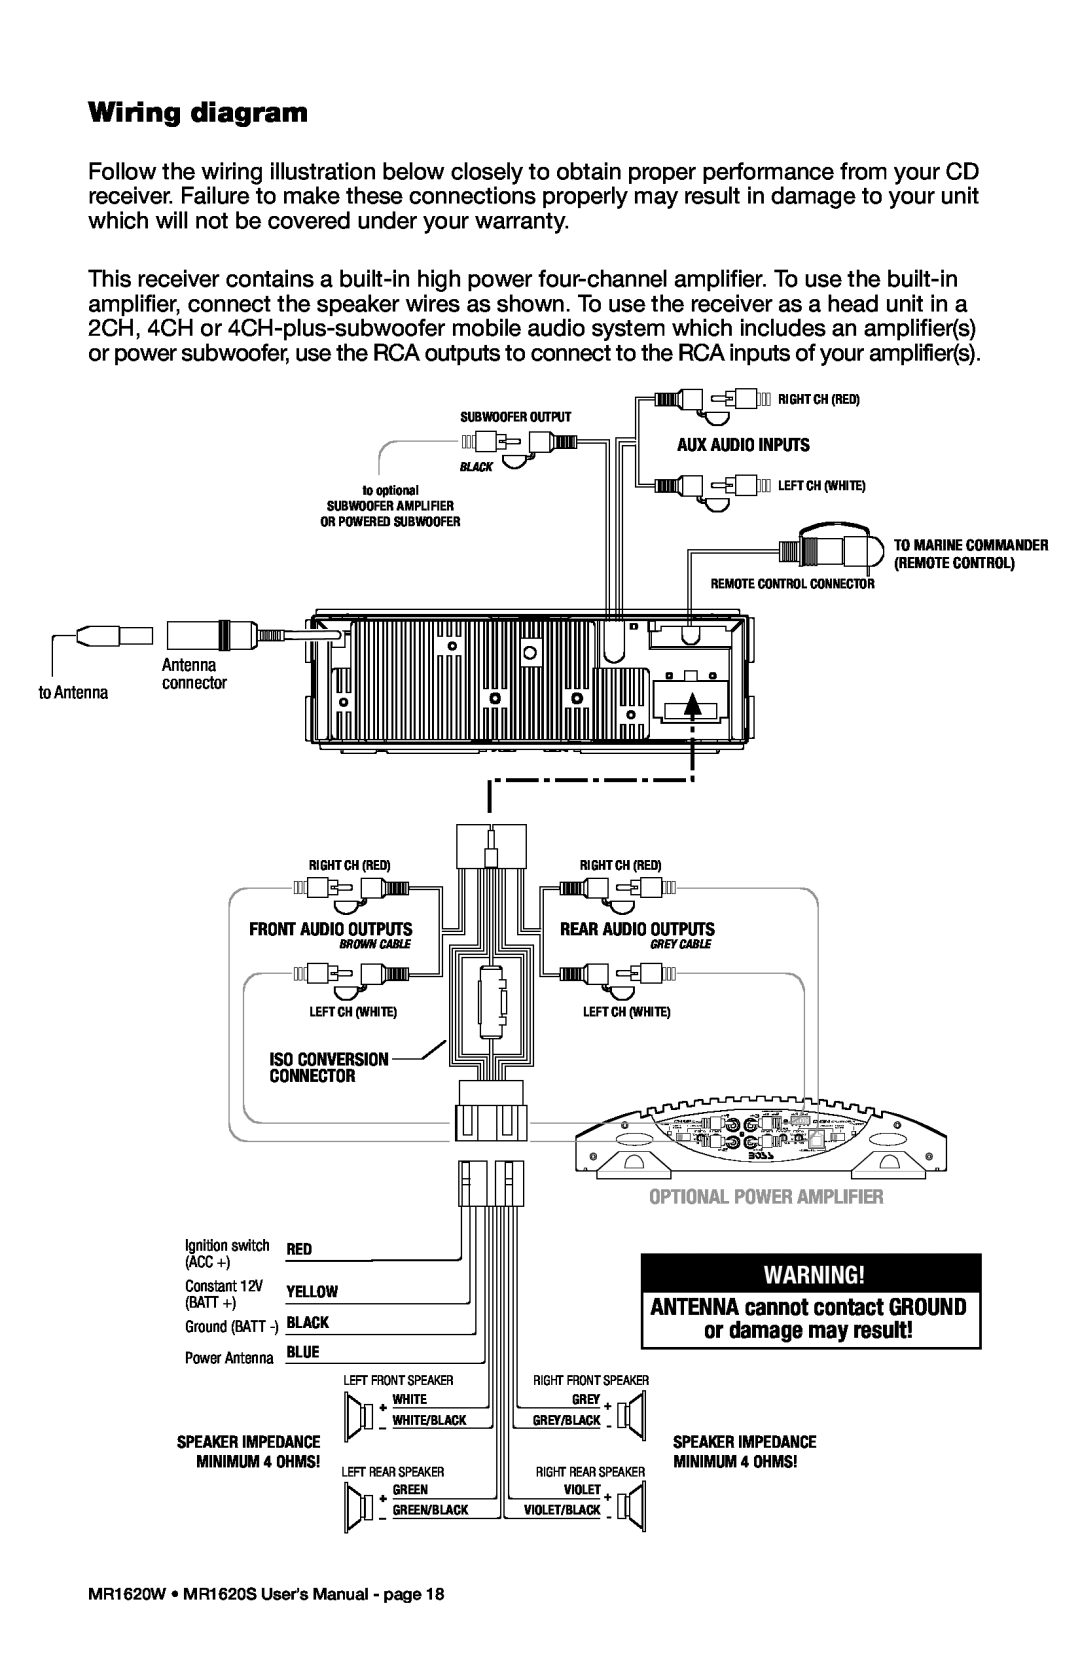 Boss Audio Systems MR1620S, MR1620W manual Wiring diagram, ANTENNA cannot contact GROUND, or damage may result 